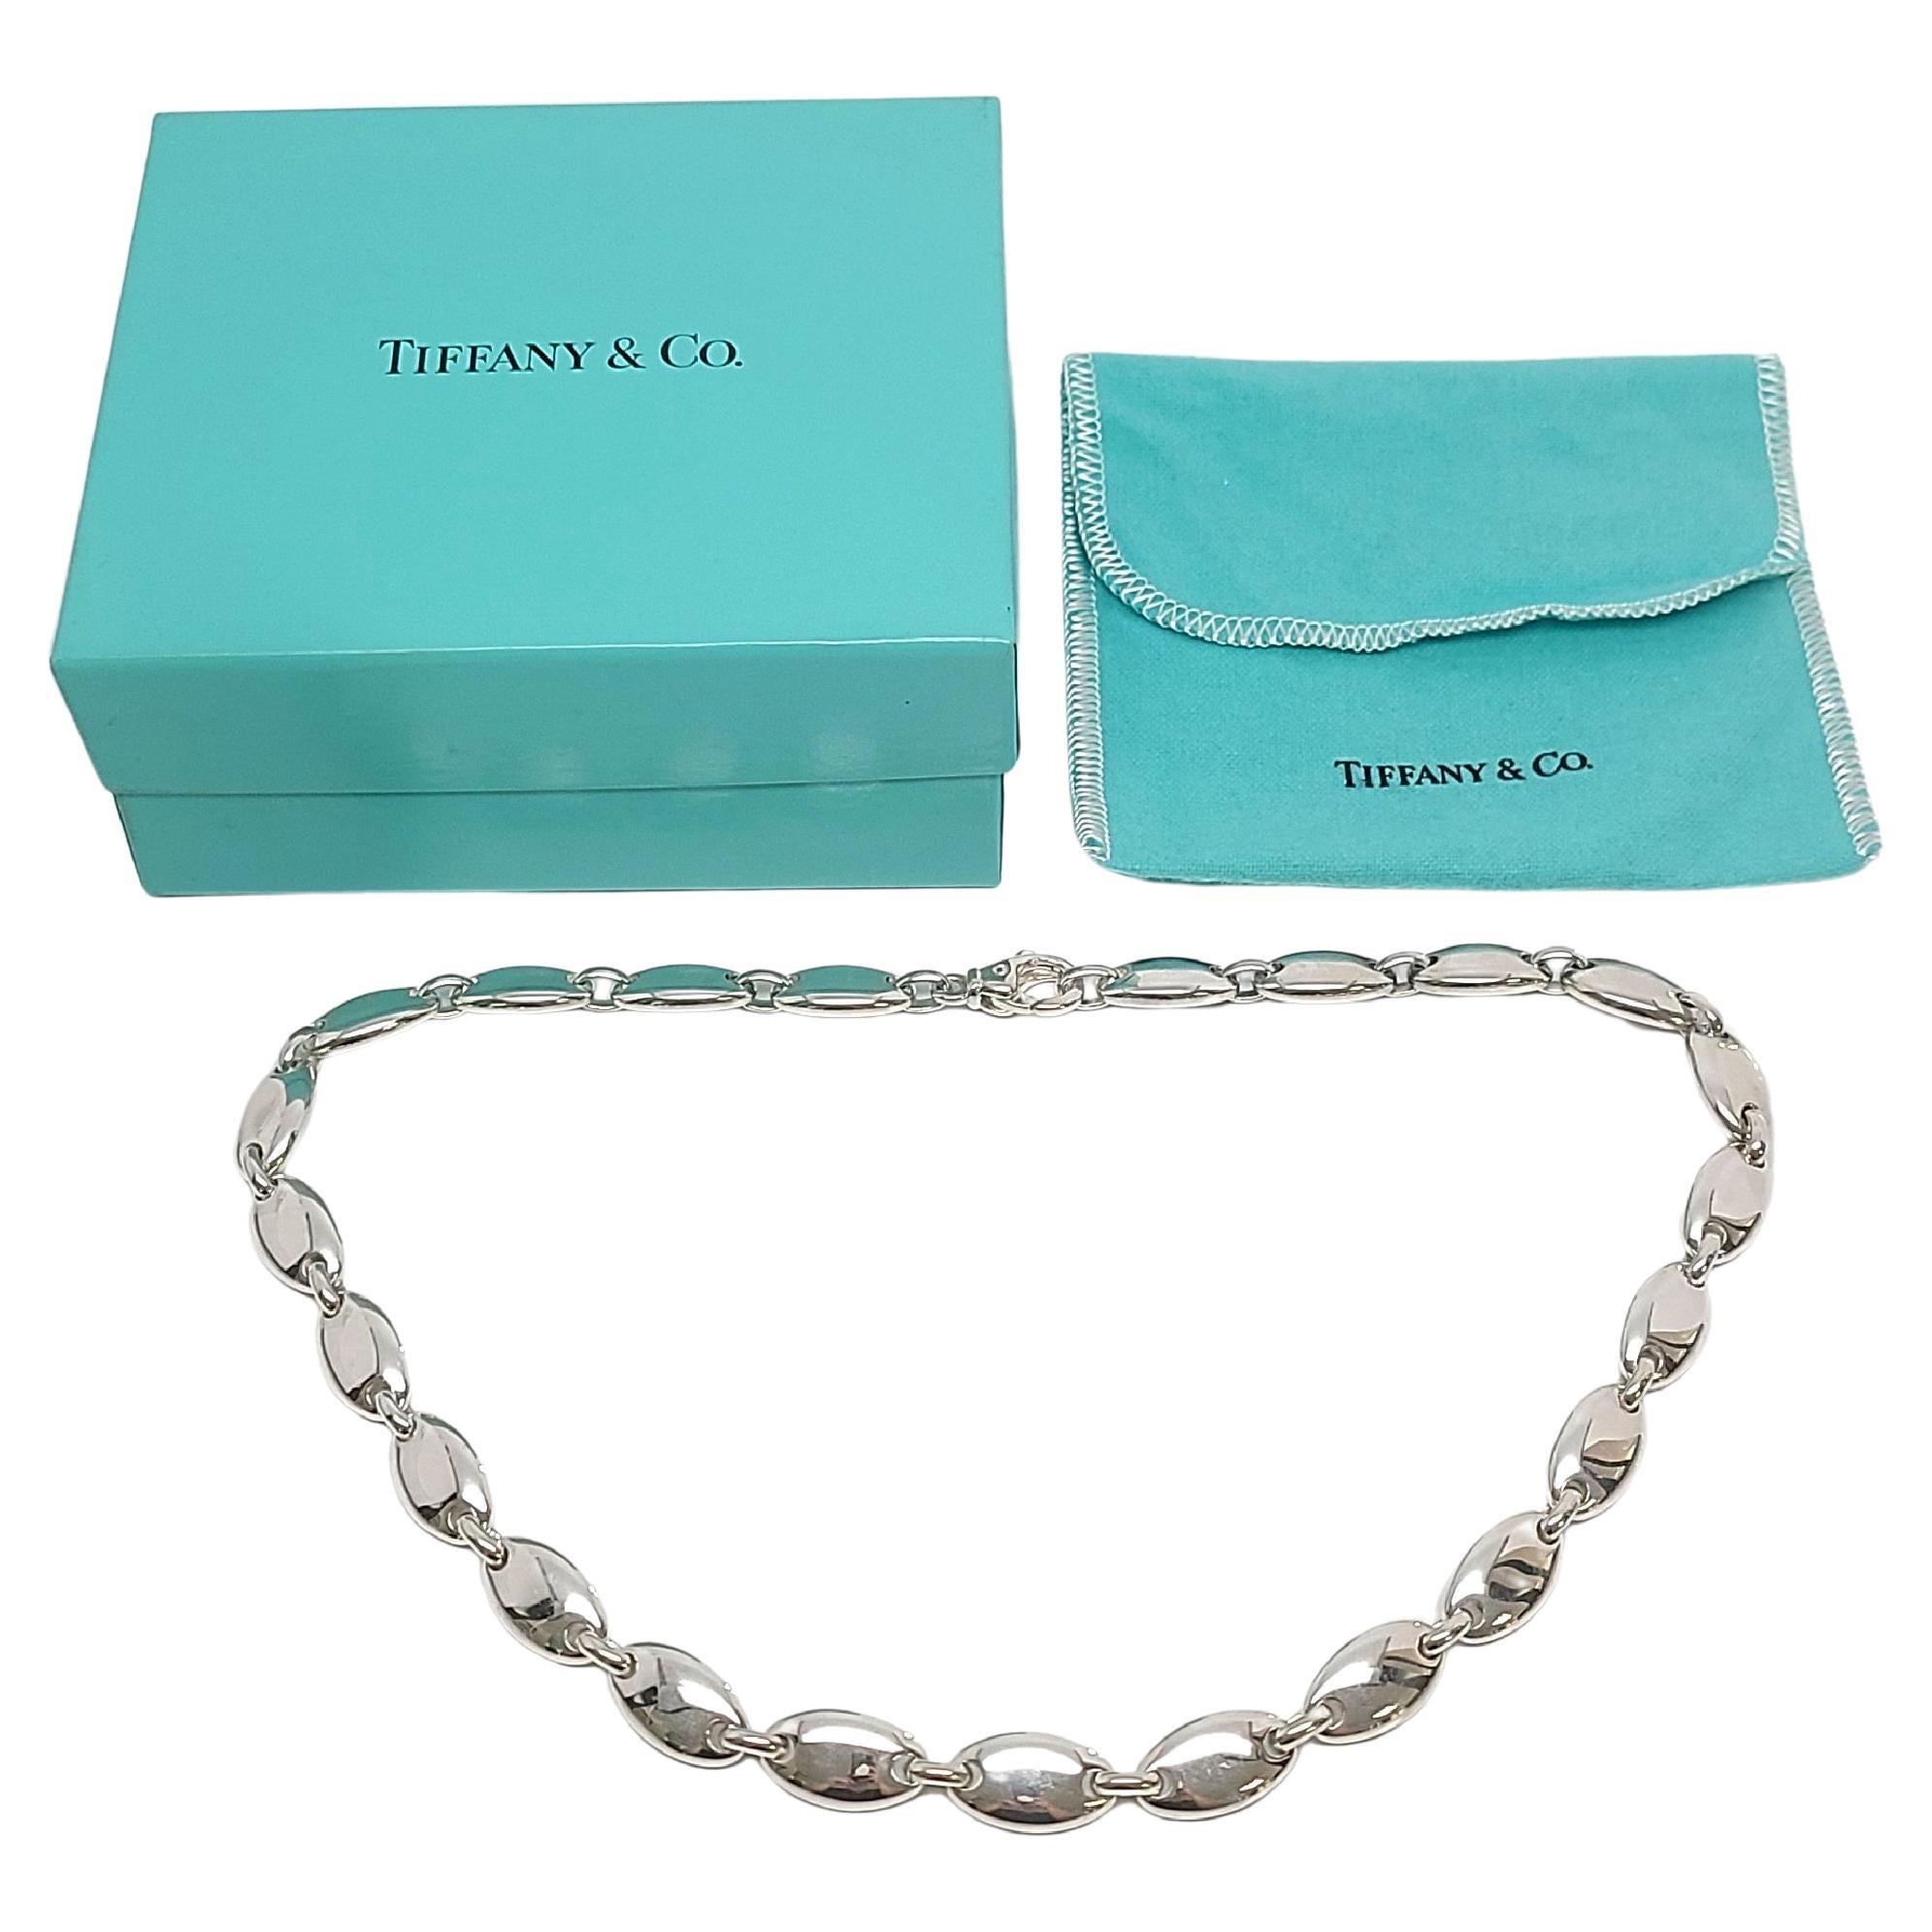 Tiffany and Co. Sterling Silver Pebble Oval Link Necklace w/Pouch